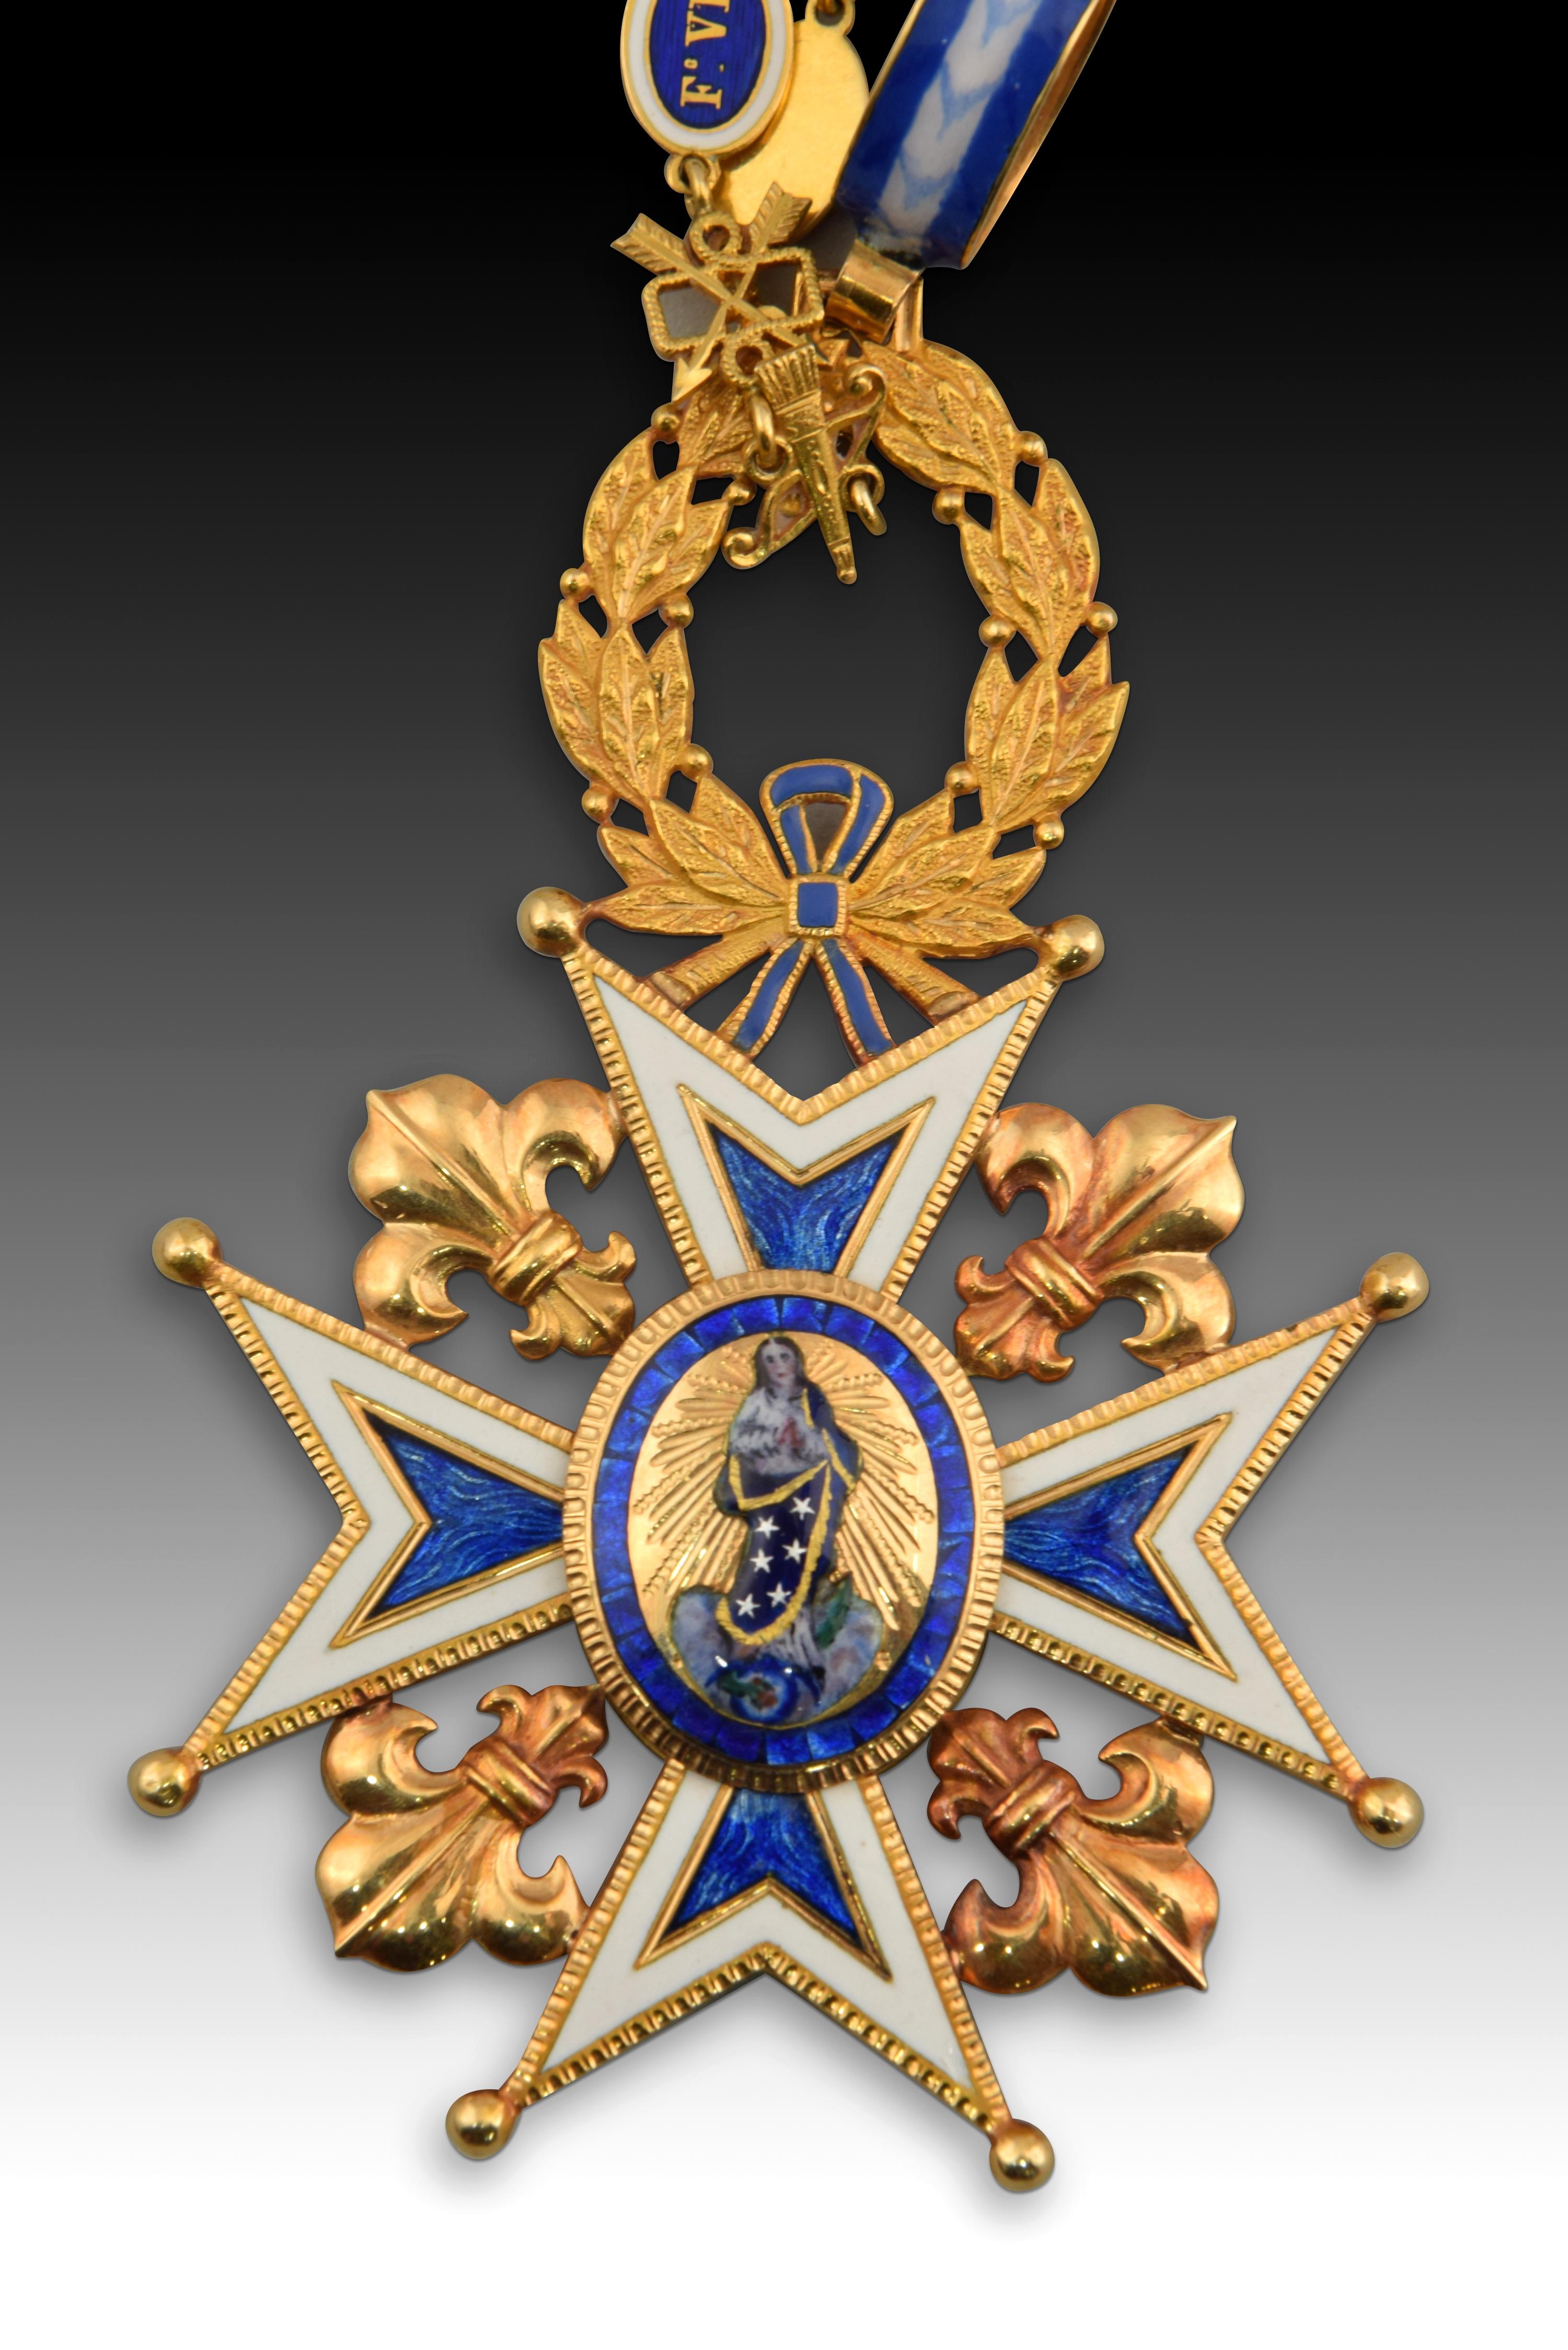 Badge of the Royal and Distinguished Spanish Order of Carlos III and necklace of the Royal Order of Isabella the Catholic. Gold, enamel. Spain, XIX century. 
Possible insignia of knighthood or commander's degree composed of an enameled ring from